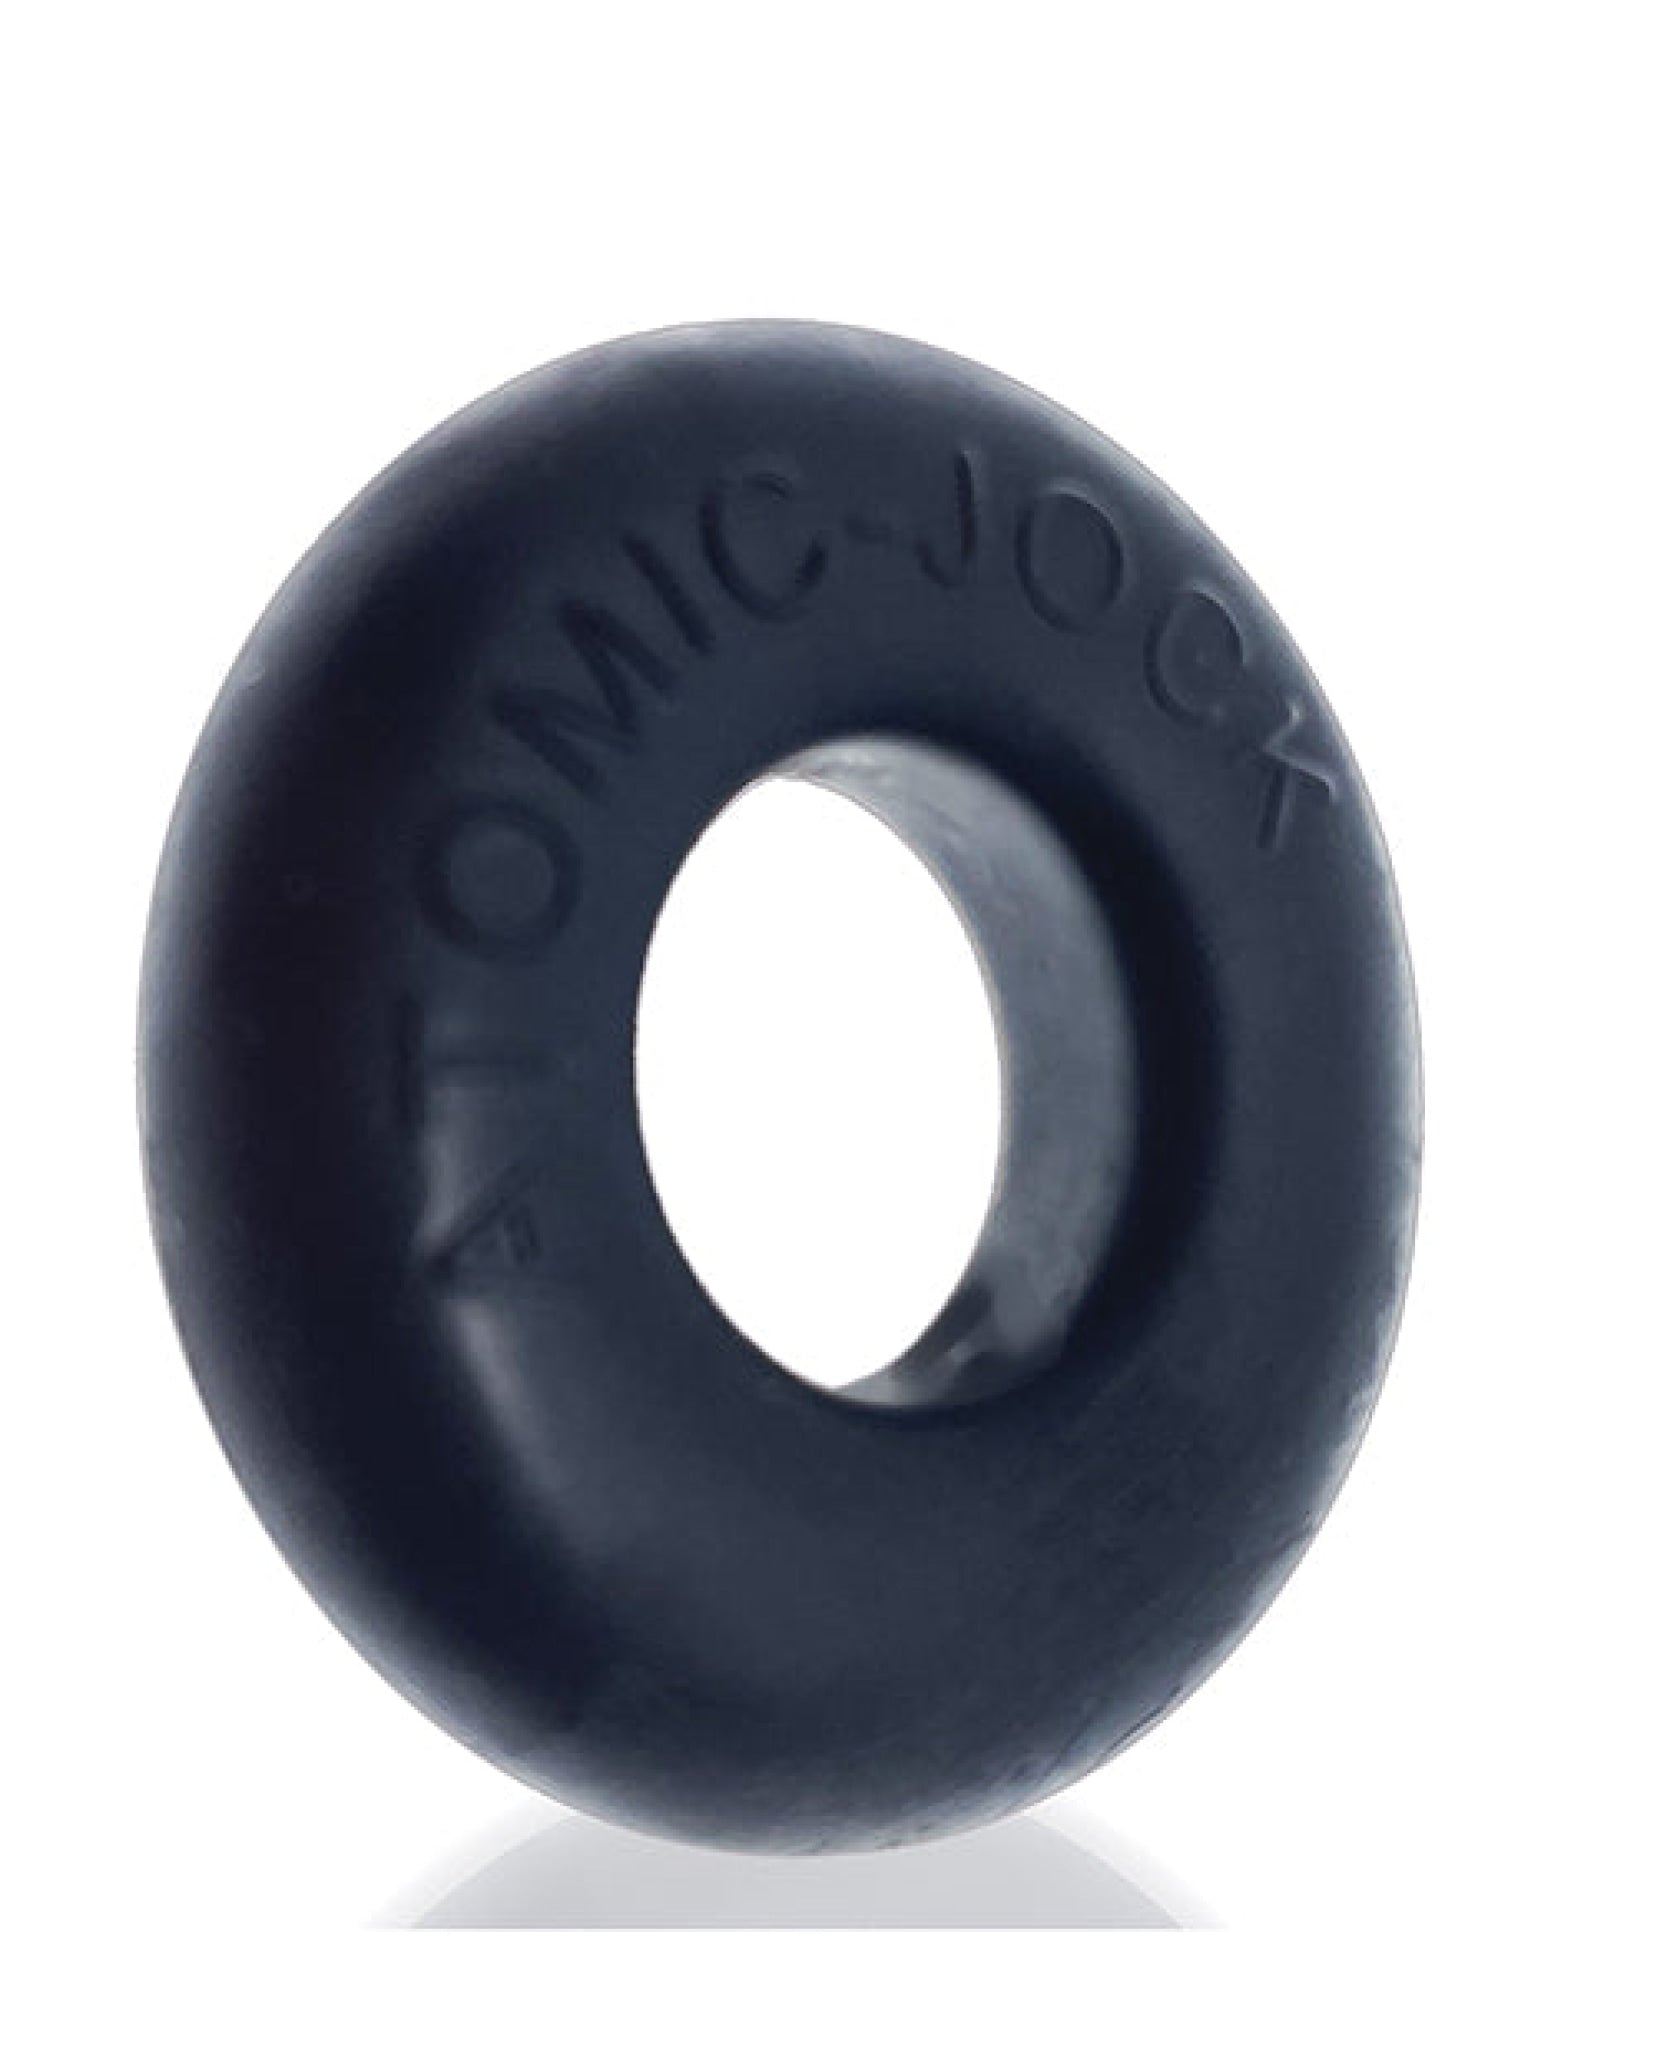 Oxballs Do-nut 2 Cock Ring Special Edition - Night Hunky Junk